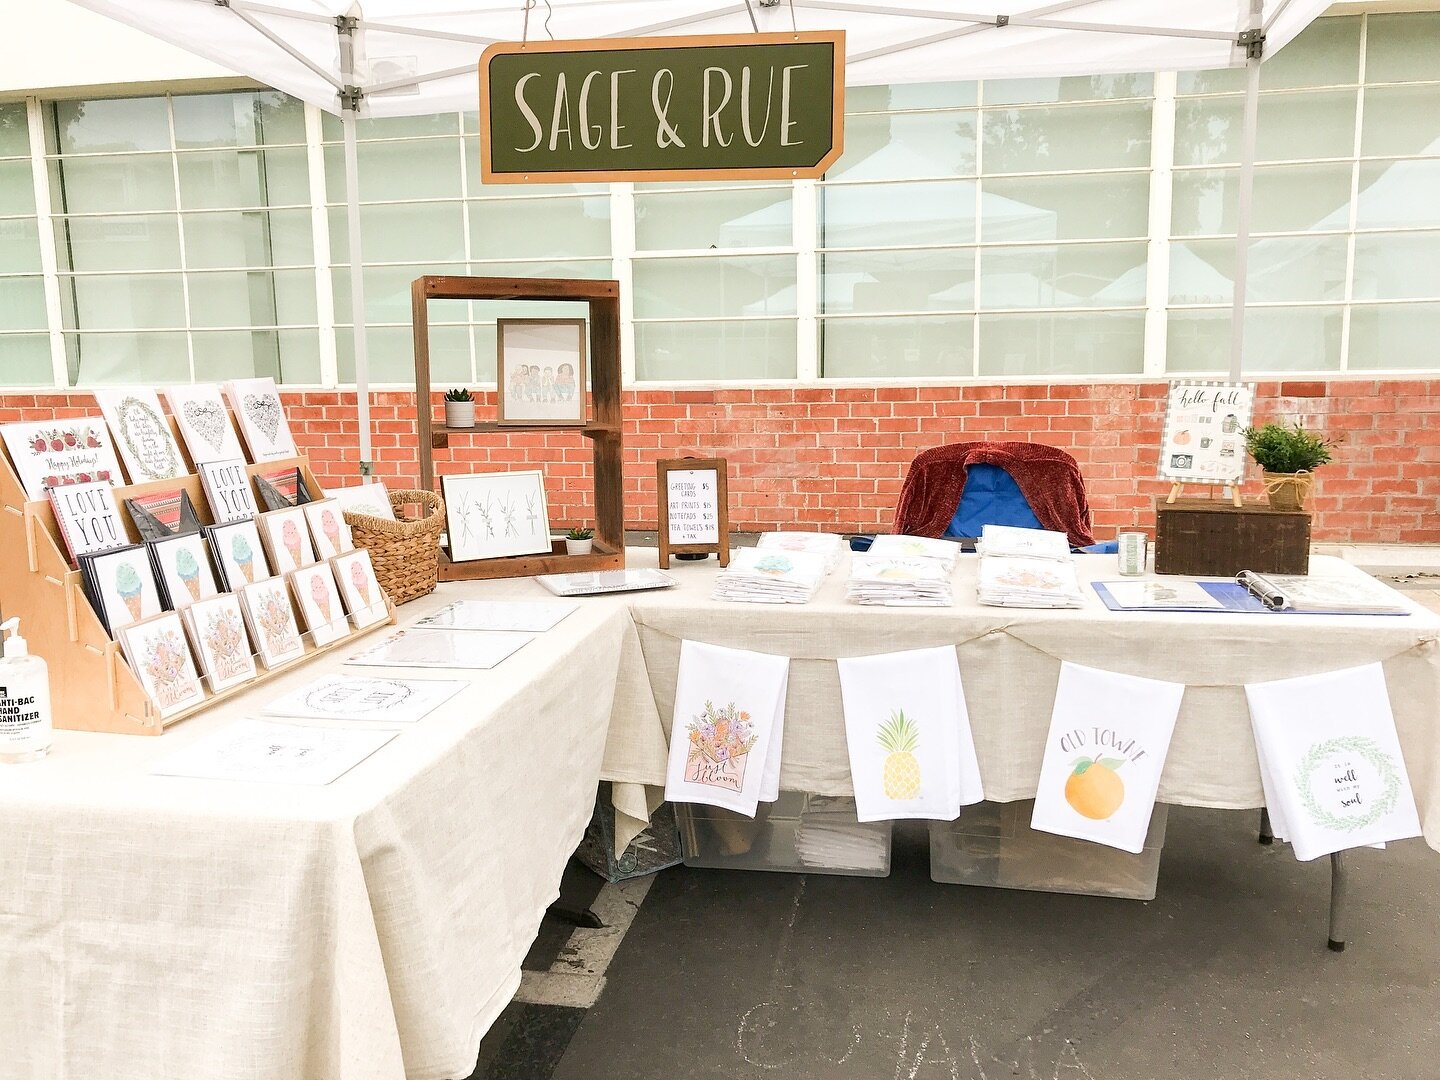 Orange Homegrown Farmers and Artisans Market is tomorrow from 9am-1pm! Come stop by for farm-fresh groceries and start your holiday shopping with the local artisans, including me! I'll have all of your favorite watercolor goods and gifts, along with 